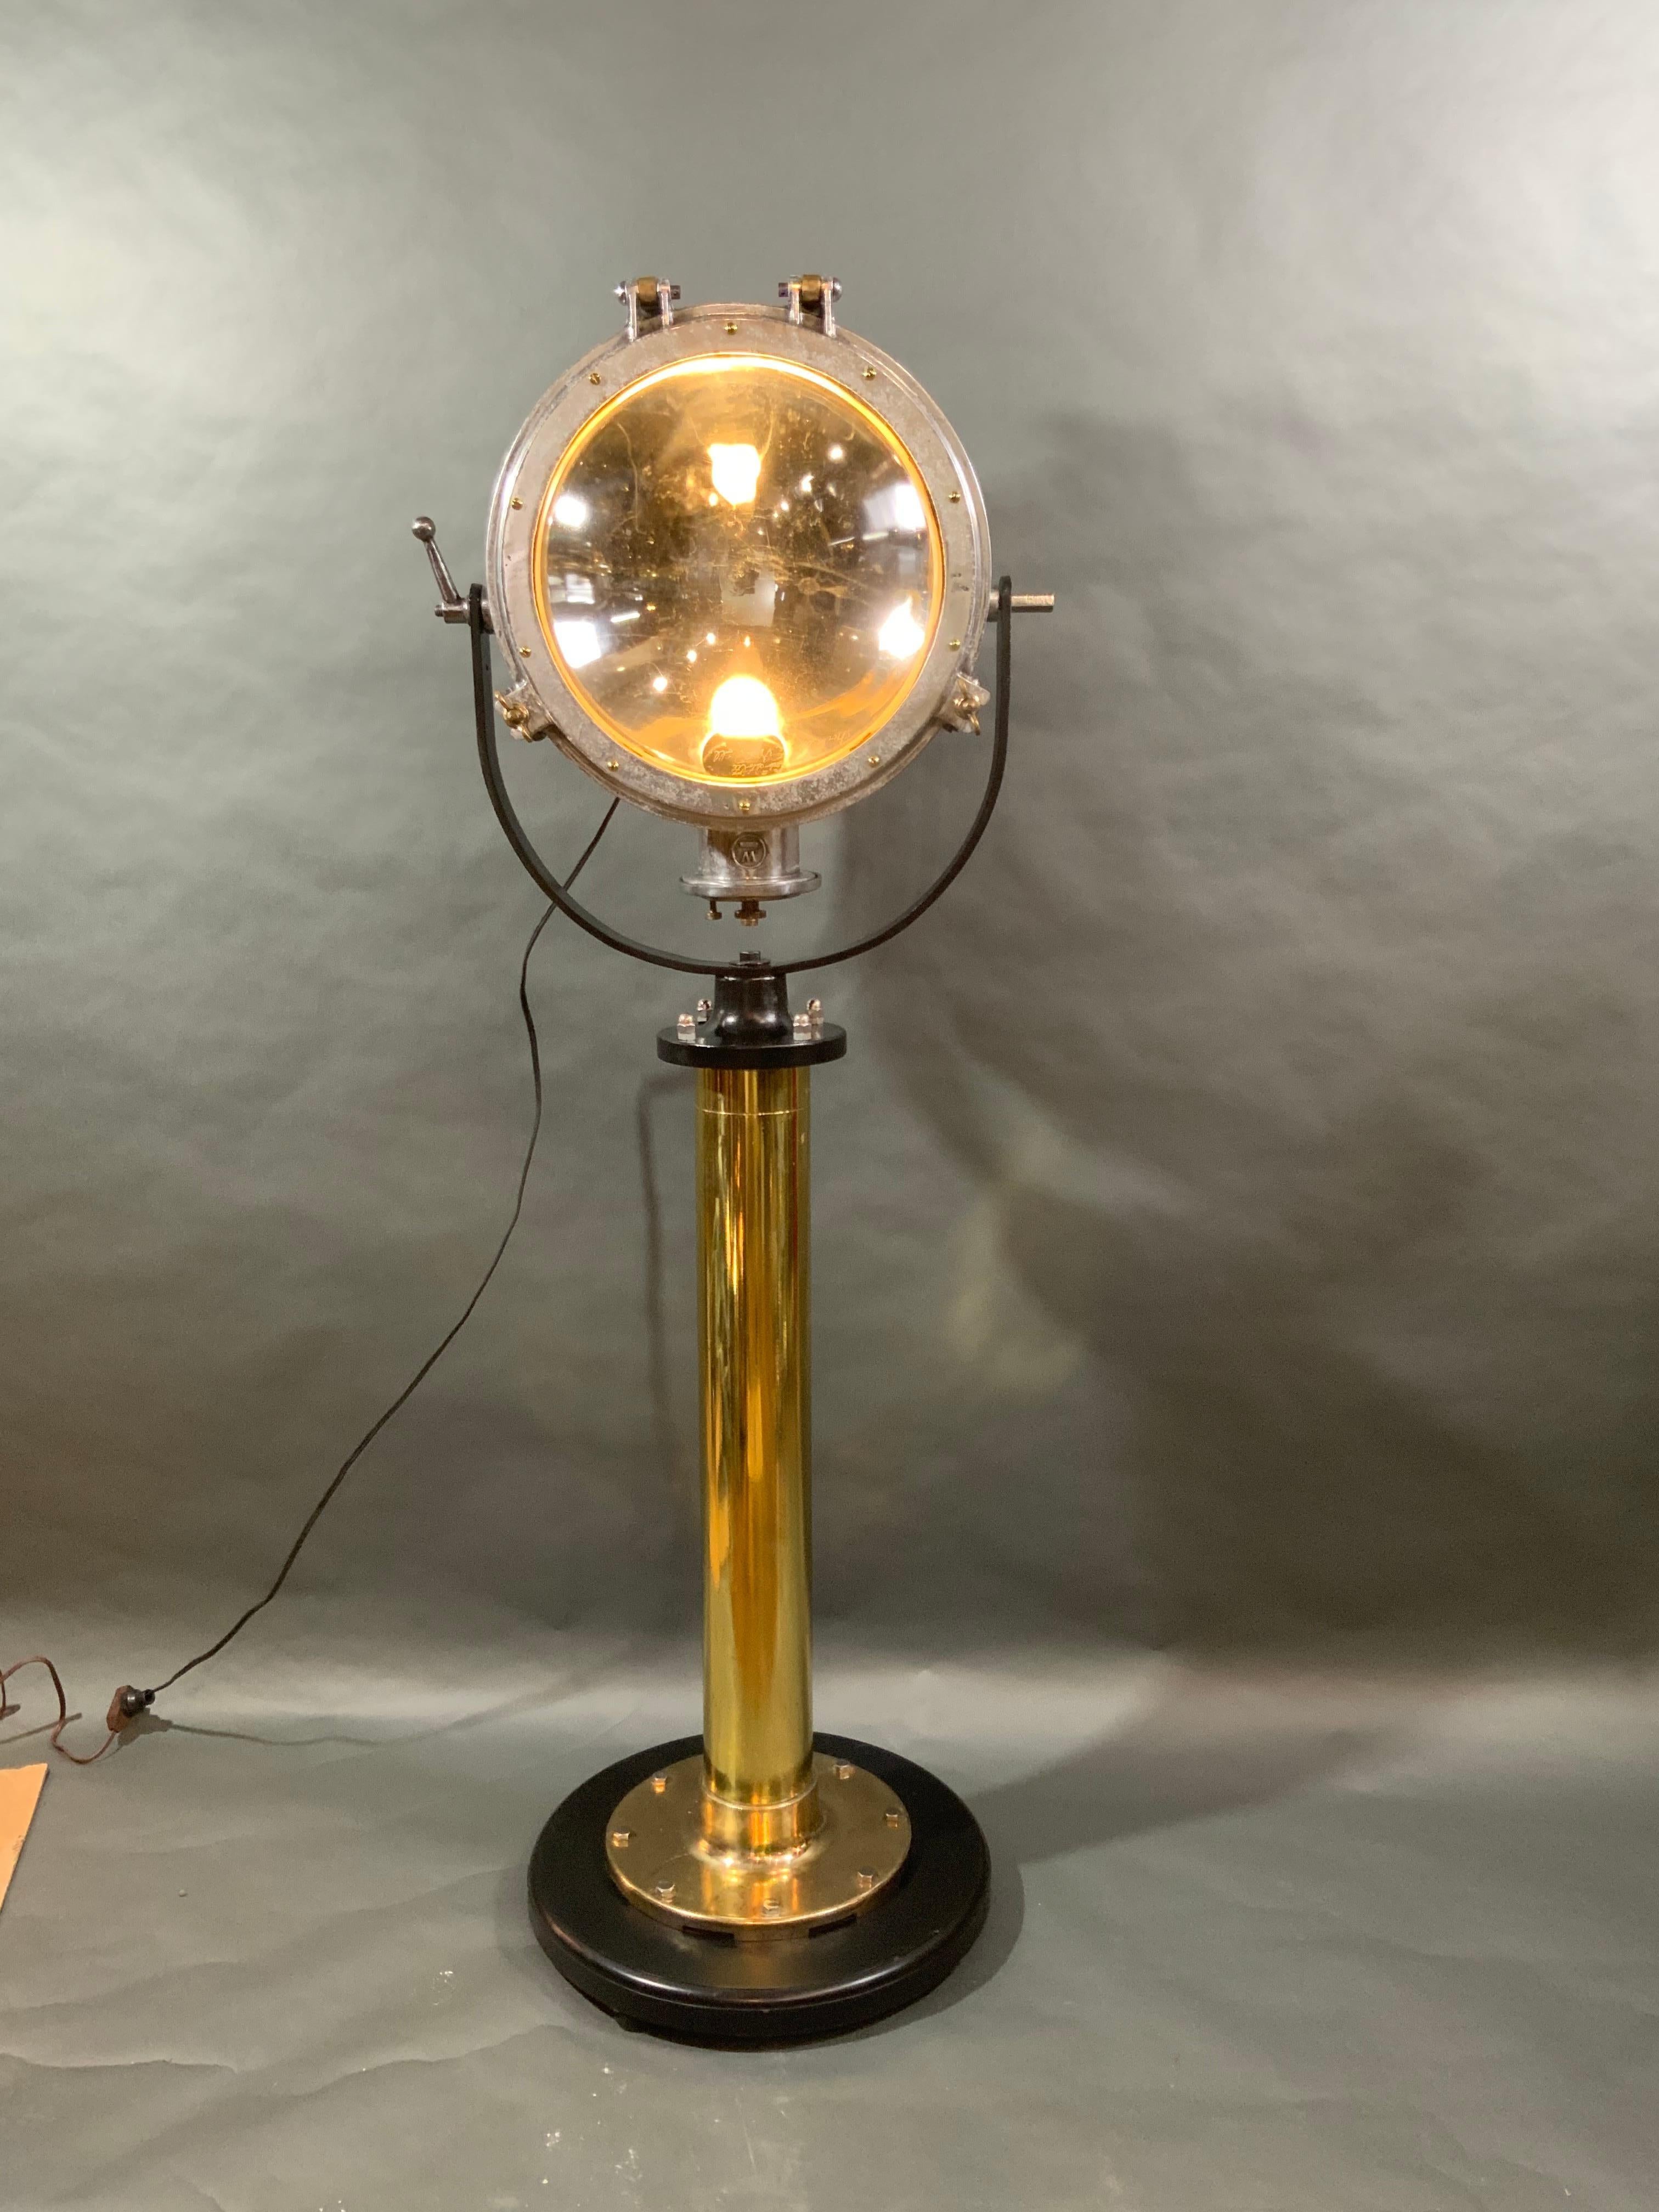 Industrial lighting piece of vintage lighting. Ships spotlight which is mounted by an iron yoke onto a brass pedestal. Rewired with an electric socket. Weight is 107 pounds. Dimensions are 69 inches tall and 20 inch diameter. Price $3495.